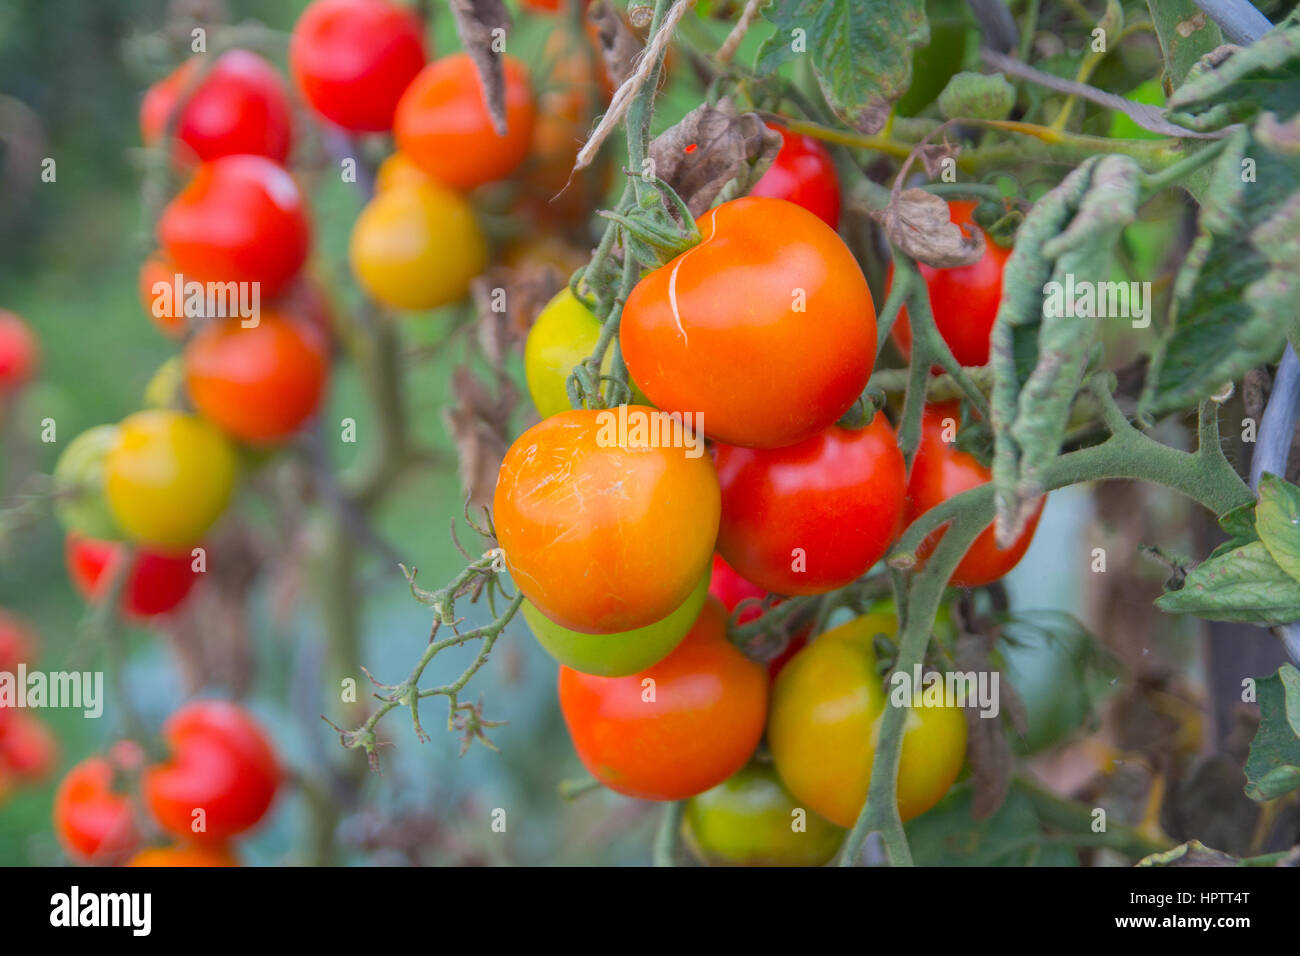 bunch of ripe red tomato closeup growing in garden Stock Photo